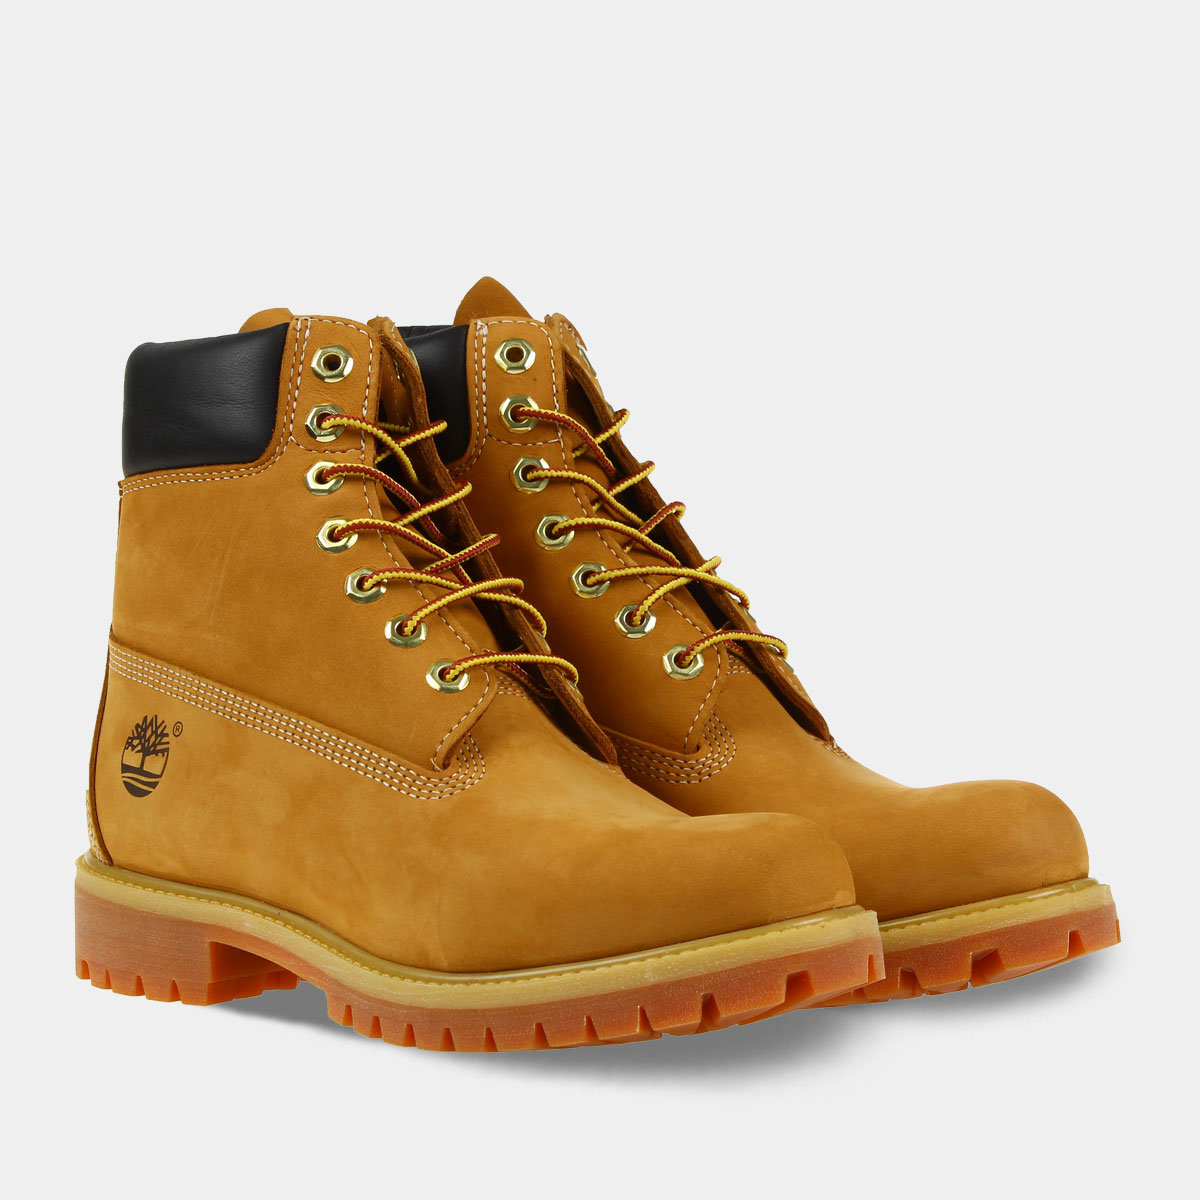 Timberland 6 inch Boot